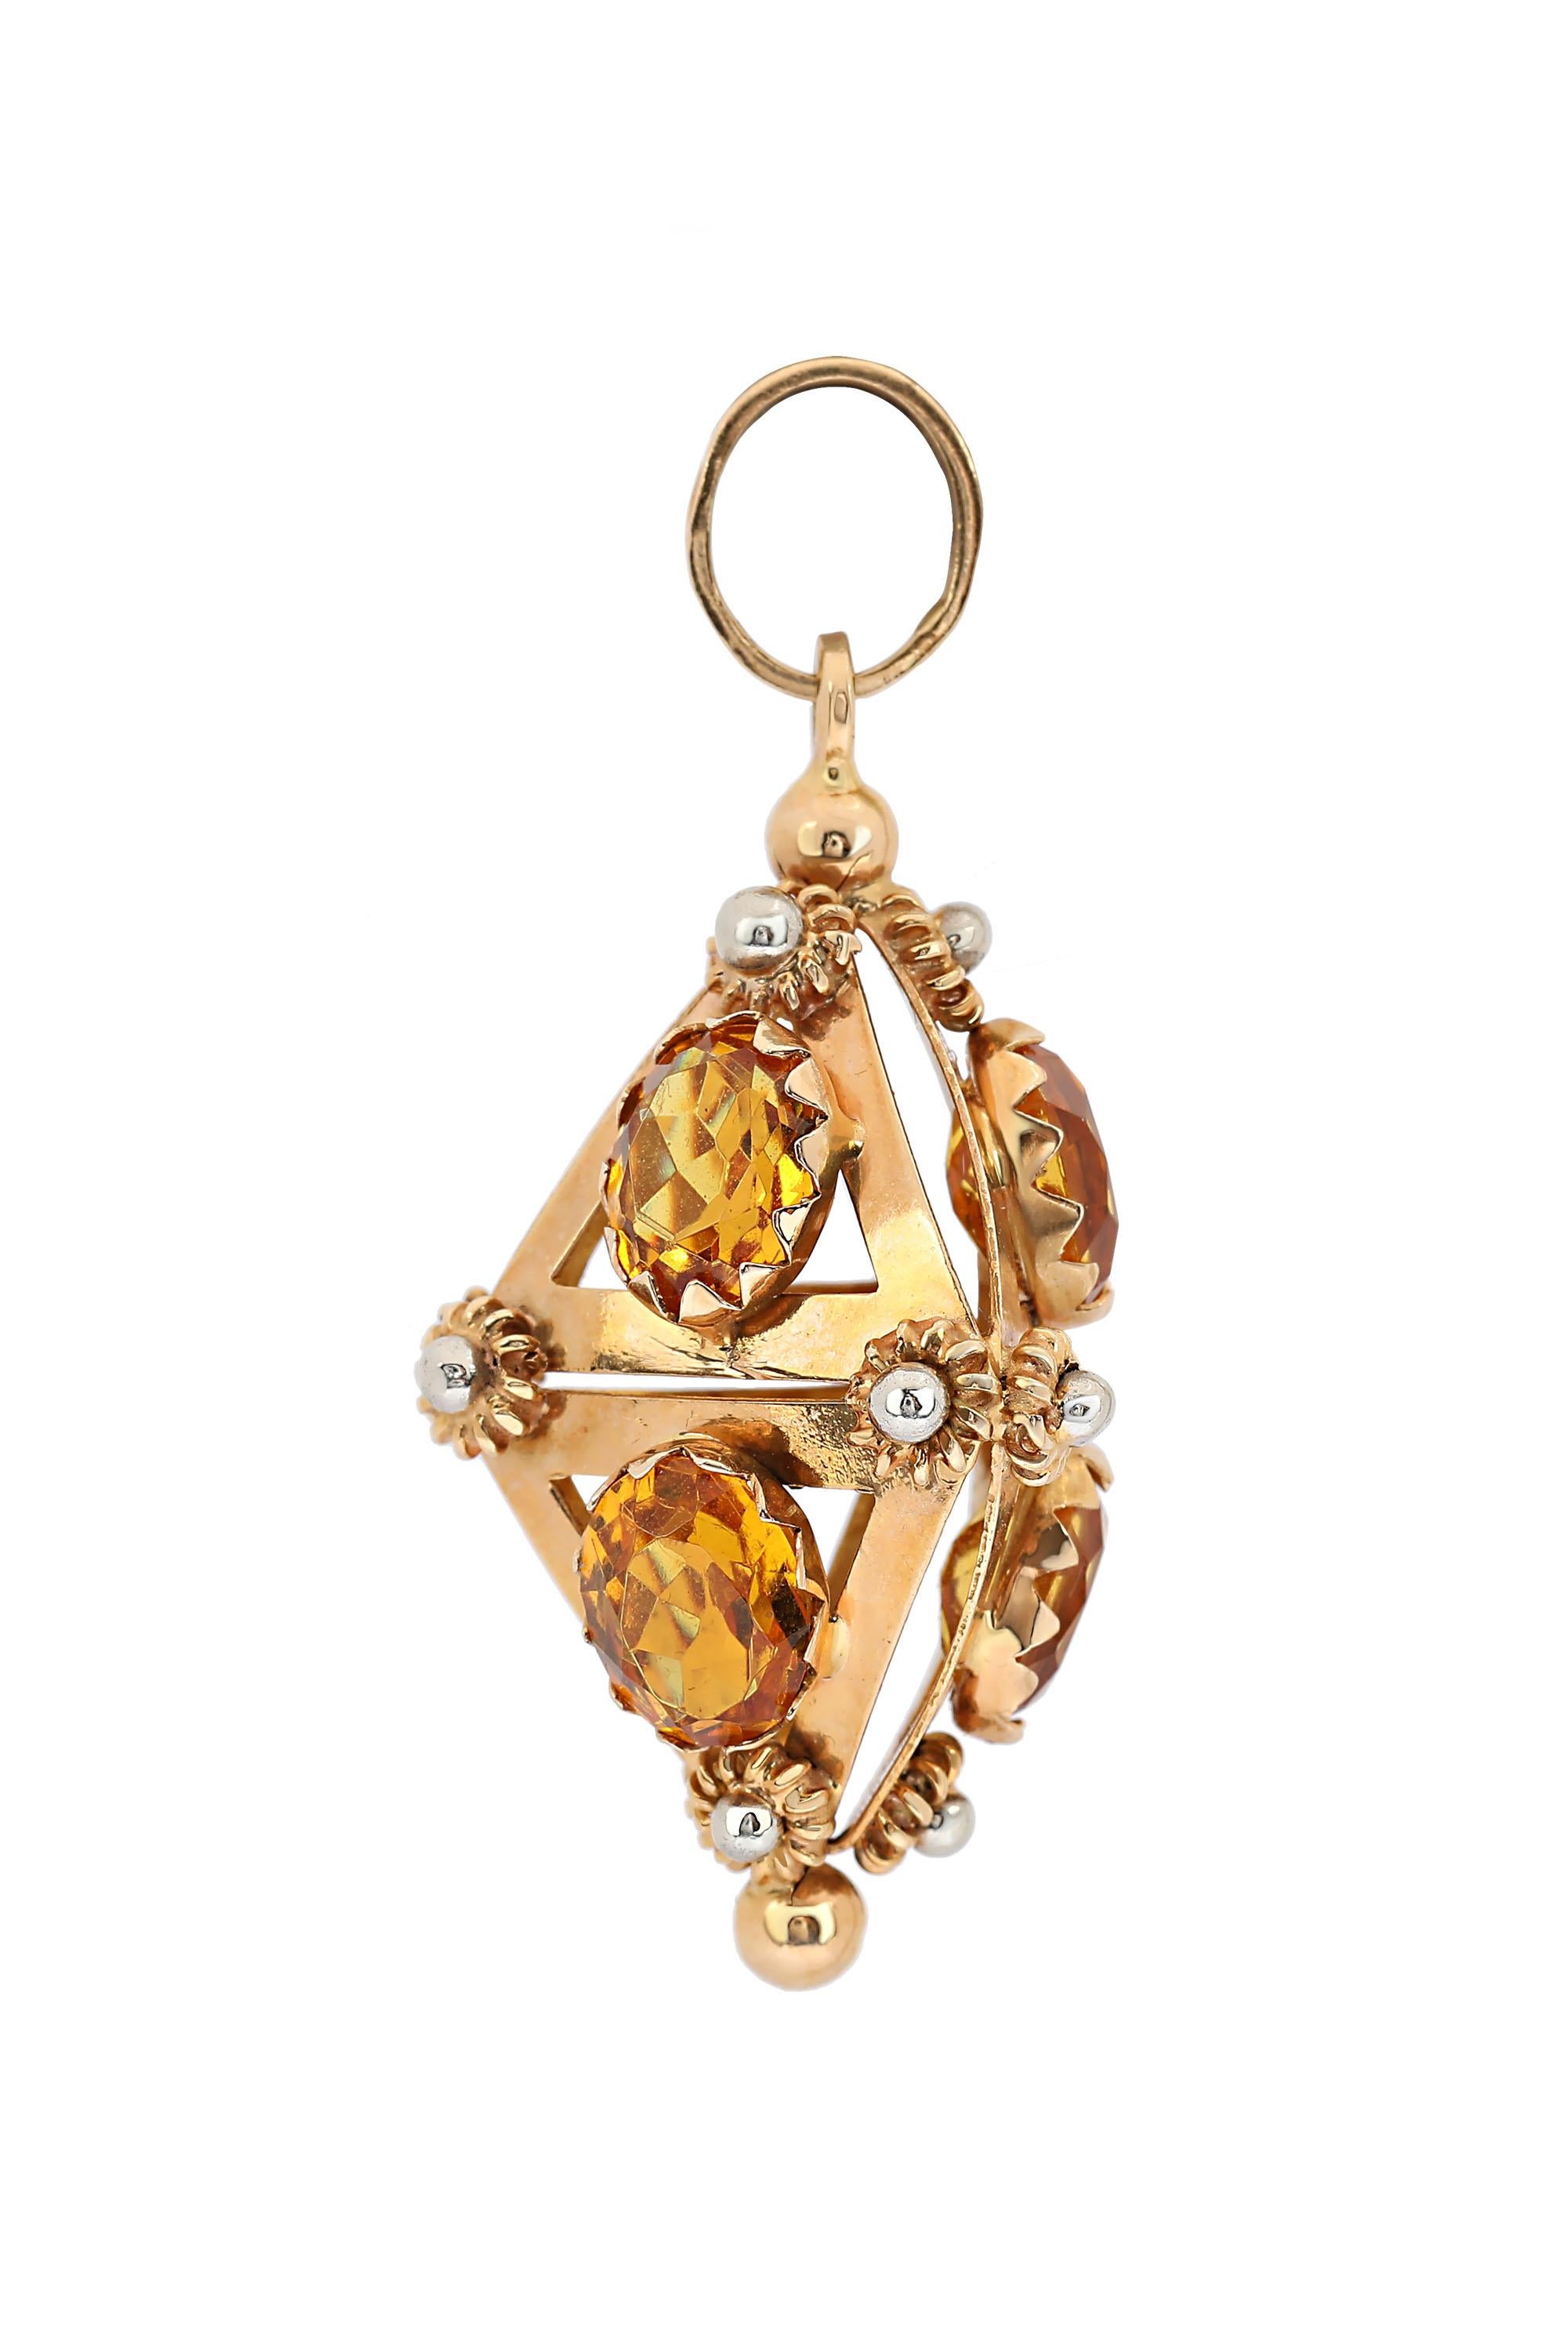 An 18 karat yellow gold charm fob pendant designed as an Etruscan pendant embellished by six oval shaped Citrine. The stones have vivid orangey-yellow color and weigh about 9 carats. The pendant is decorated with beautiful two tone rosettes and bead